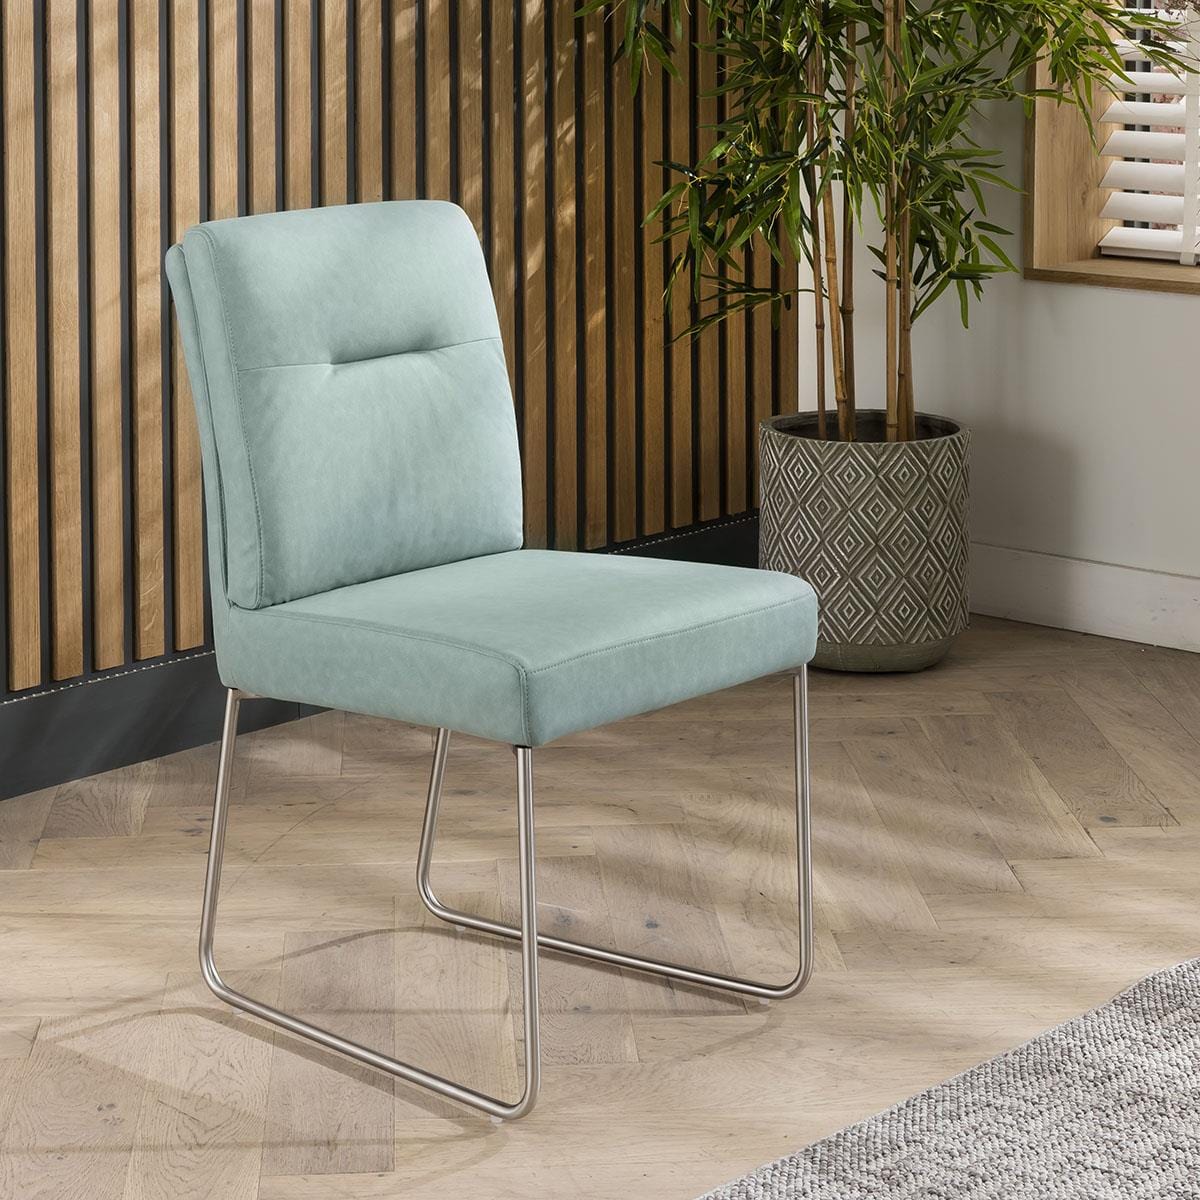 Quatropi 2 Taylor Faux Leather Dining Chairs Mint Green